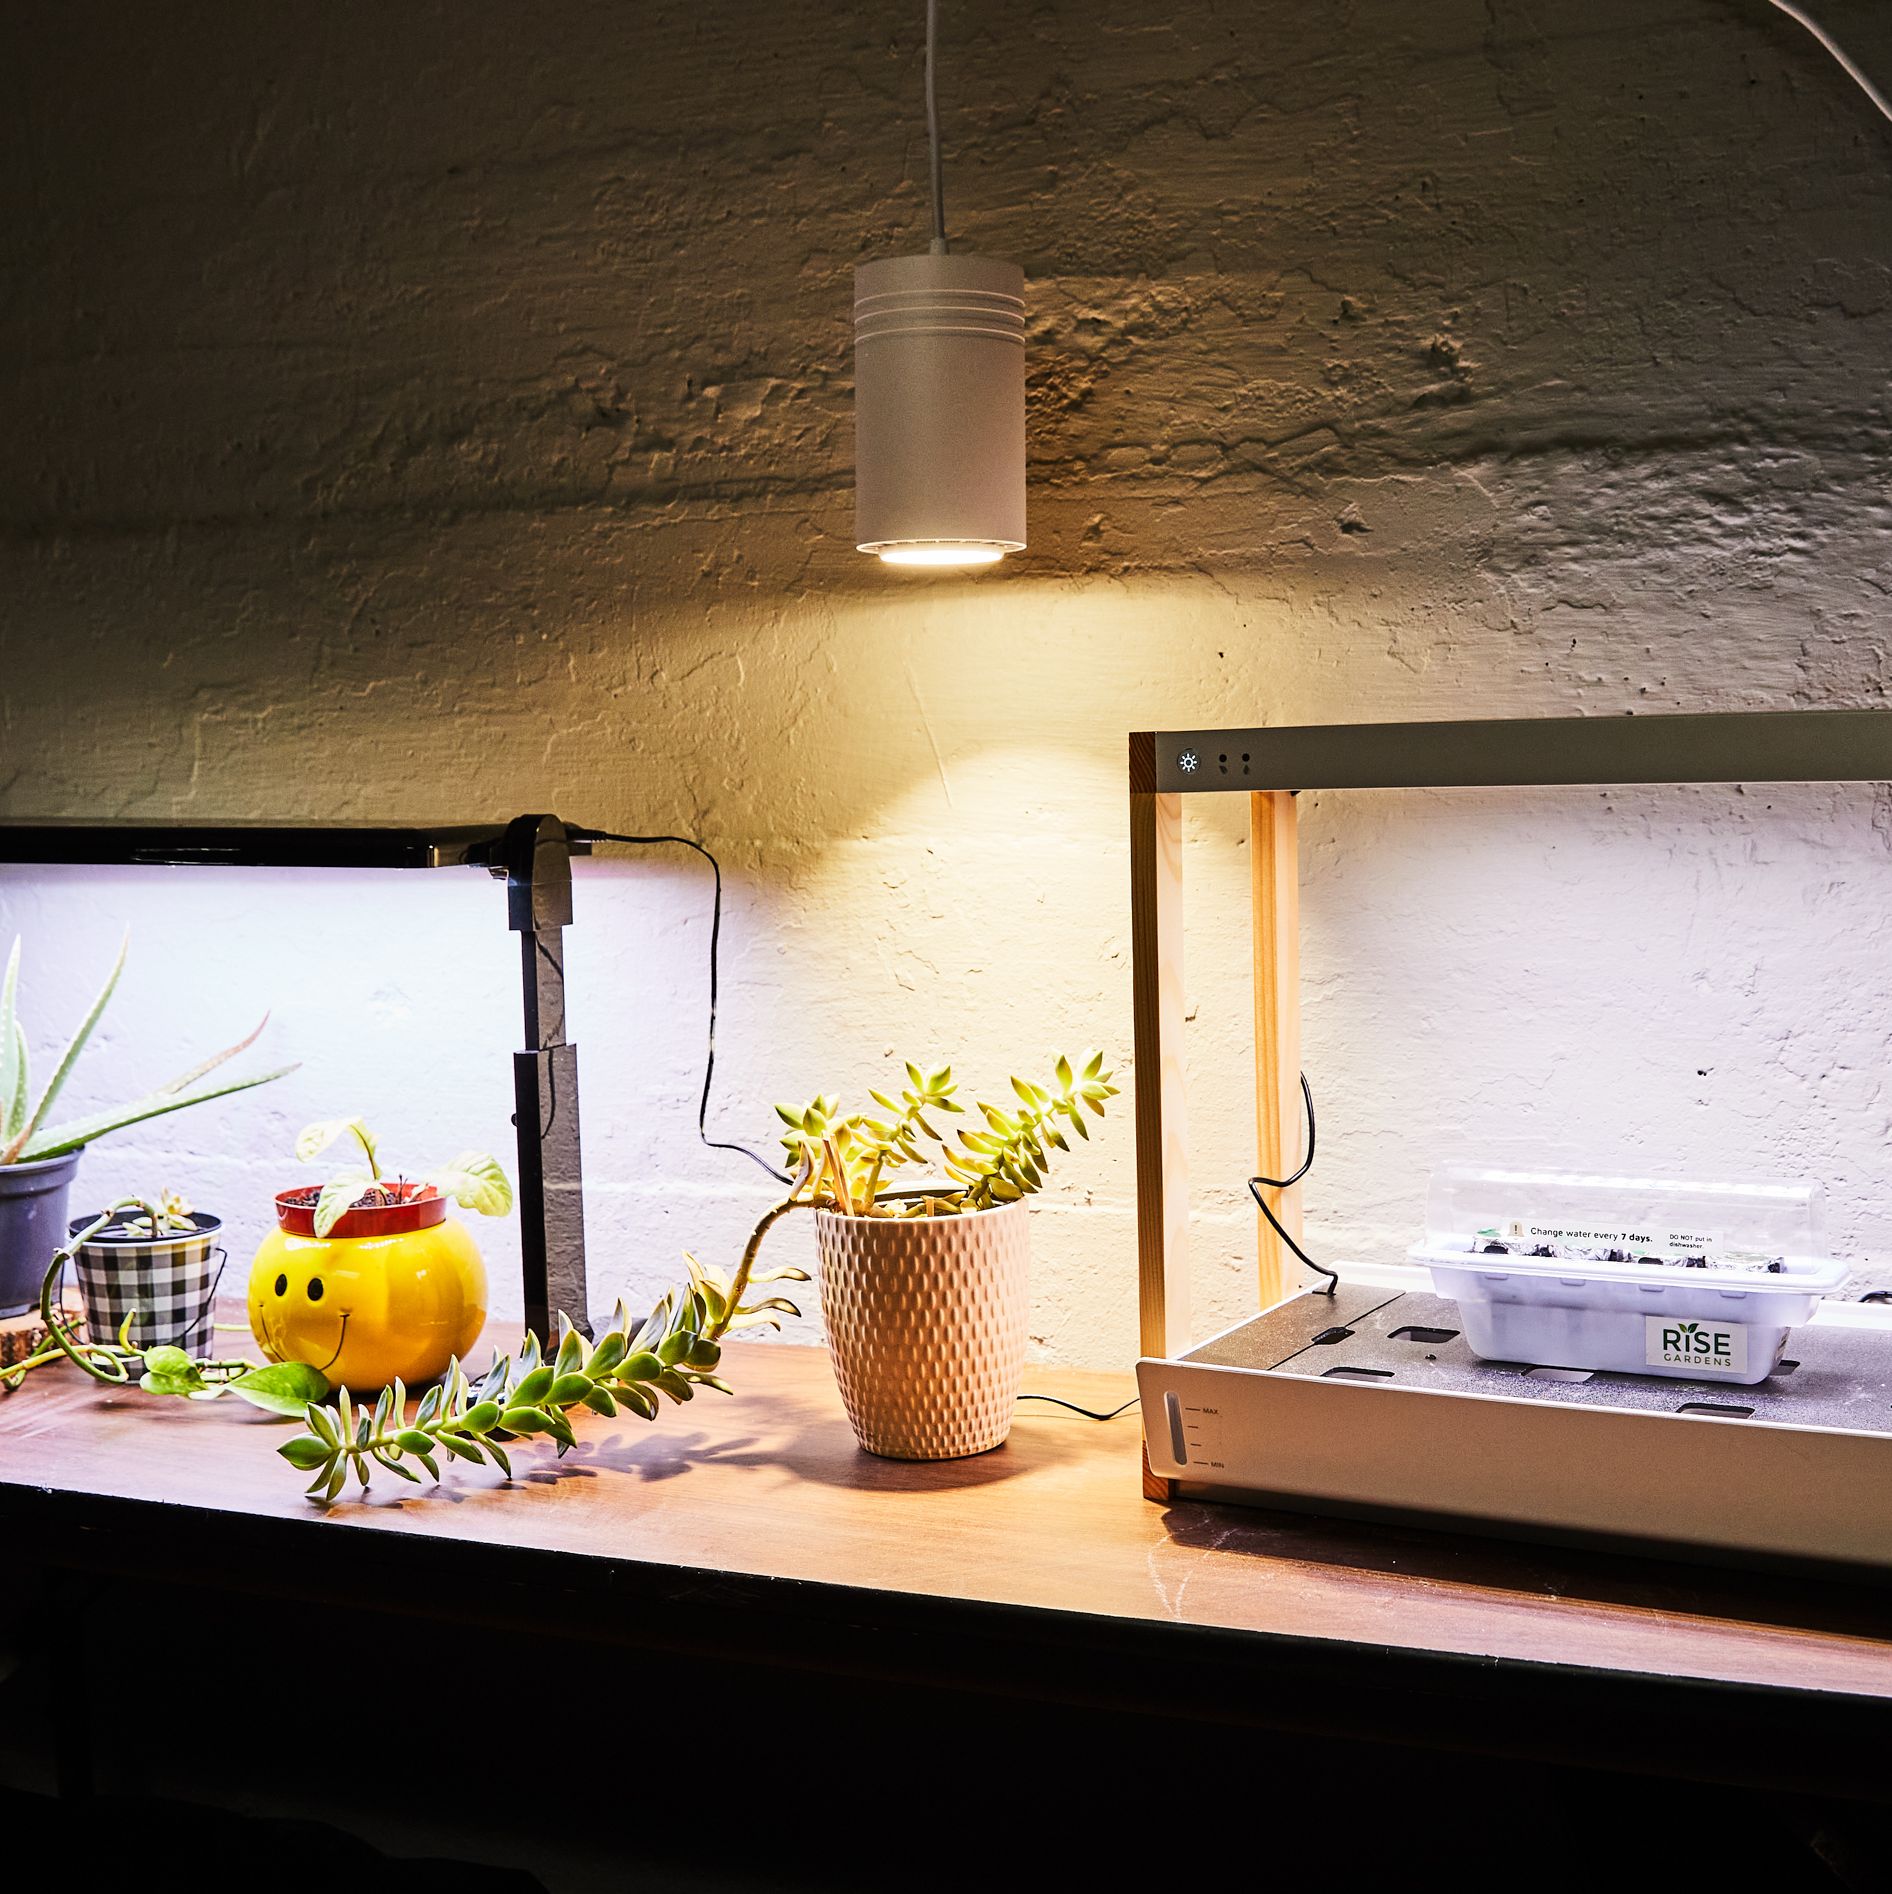 Level Up Your Leafy Friends With the Best Grow Lights for Thriving Plants